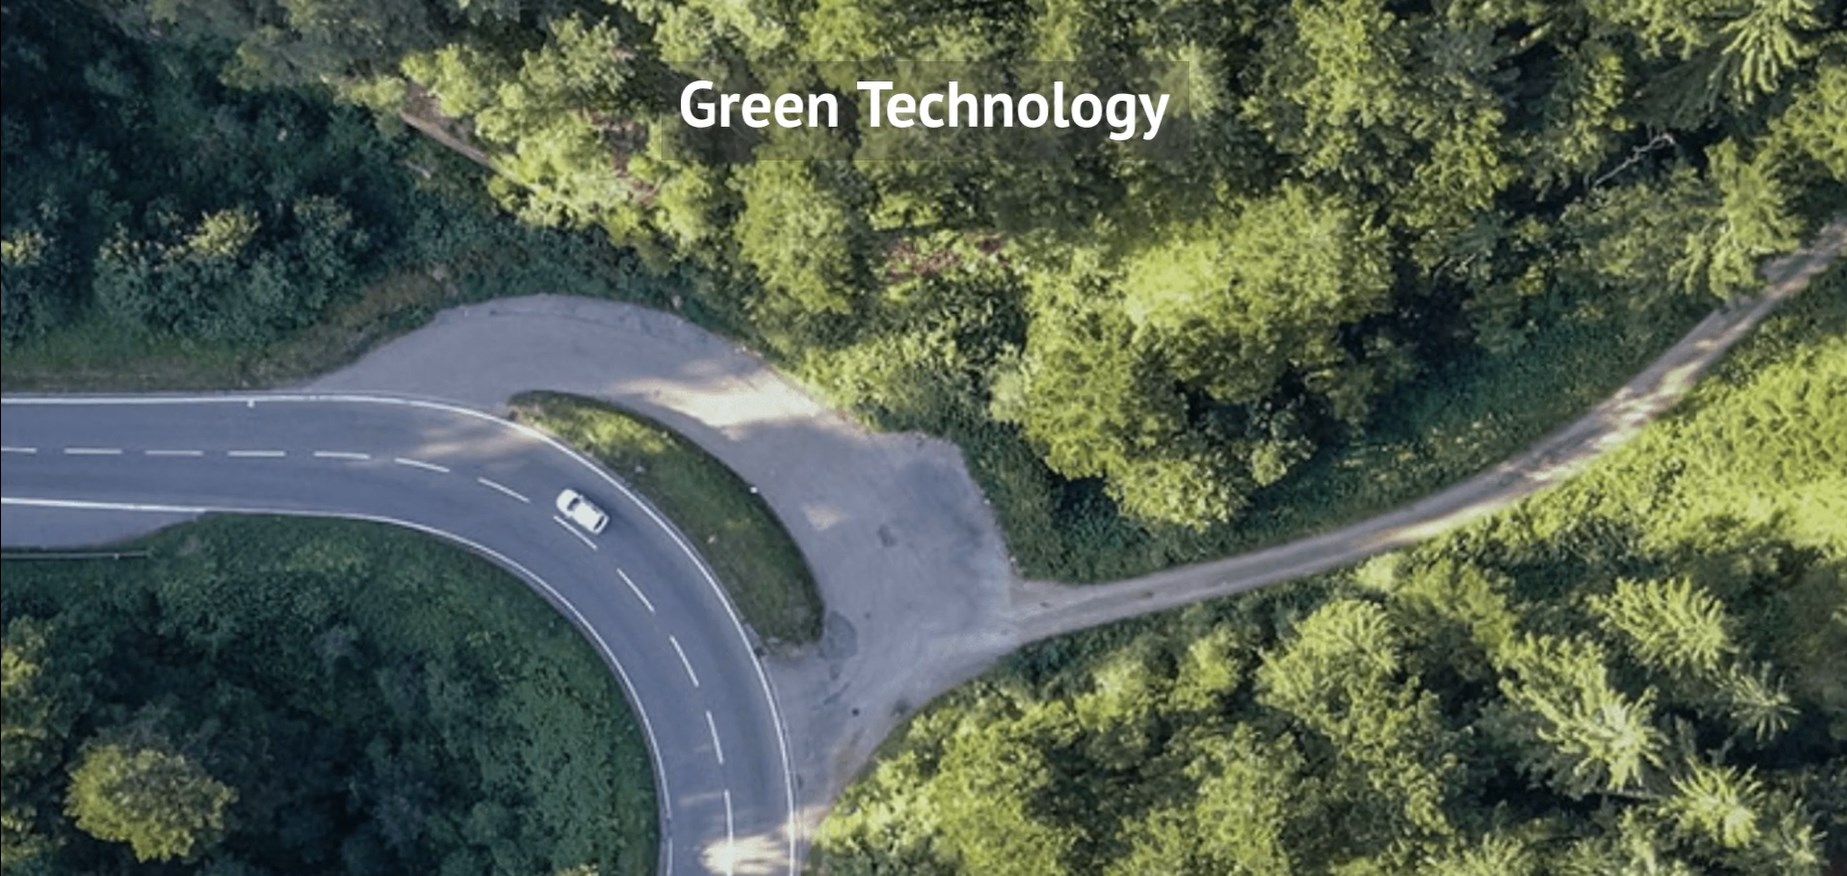 High overhead on car driving on road in woods with words "Green Technology" in white at top of the image